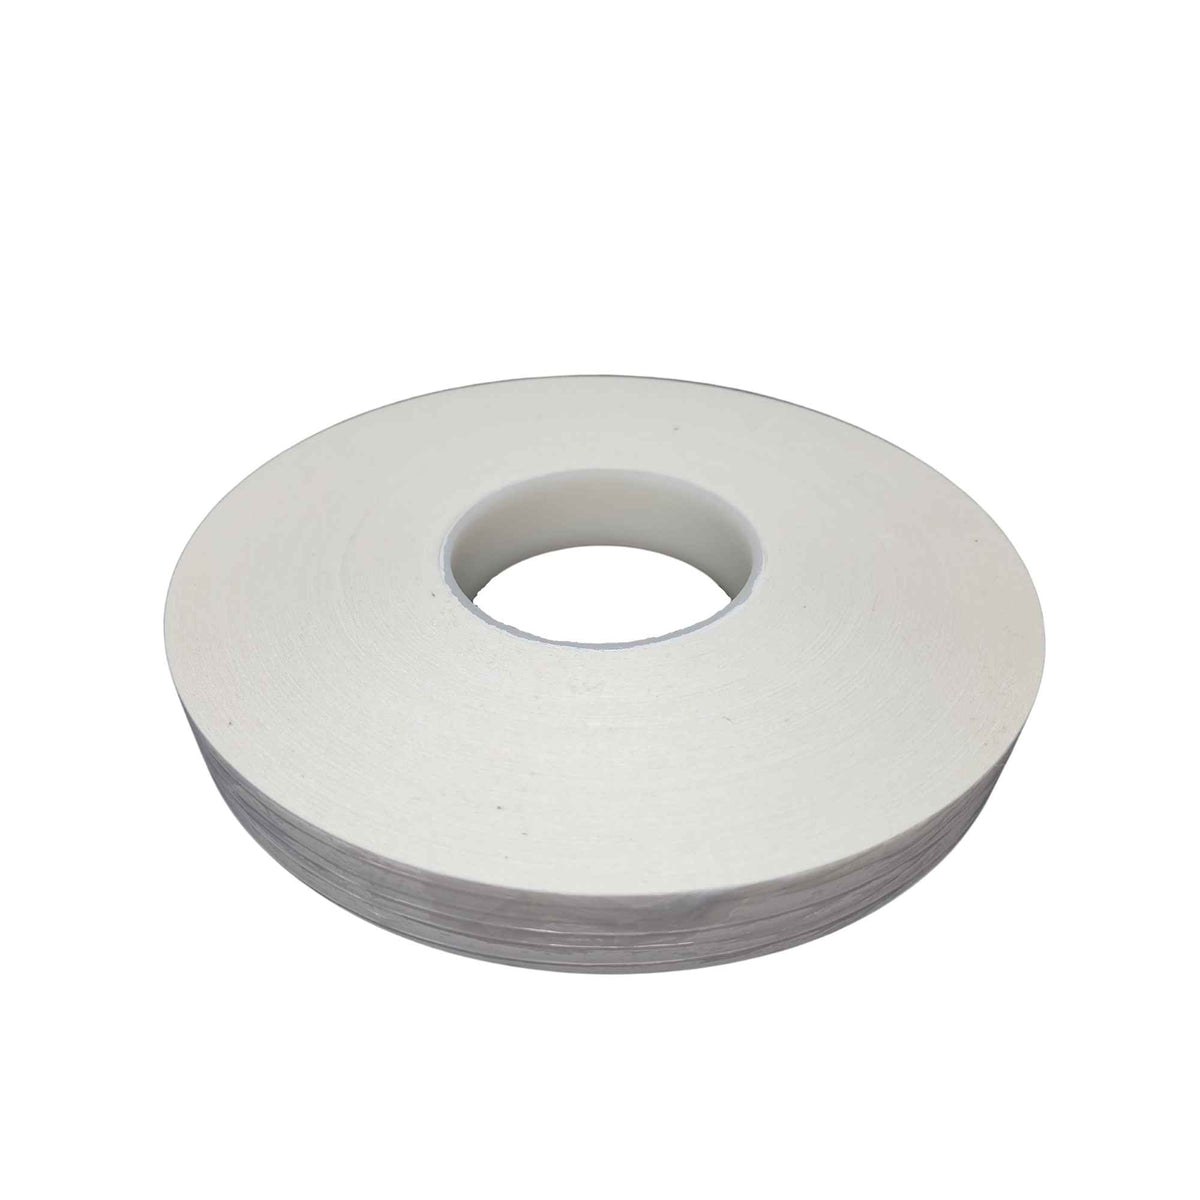 Removable Double-Sided Tape, 1/2 x 400 for mounting sample on Spin Coater  - EQ-RDST-tape-LD